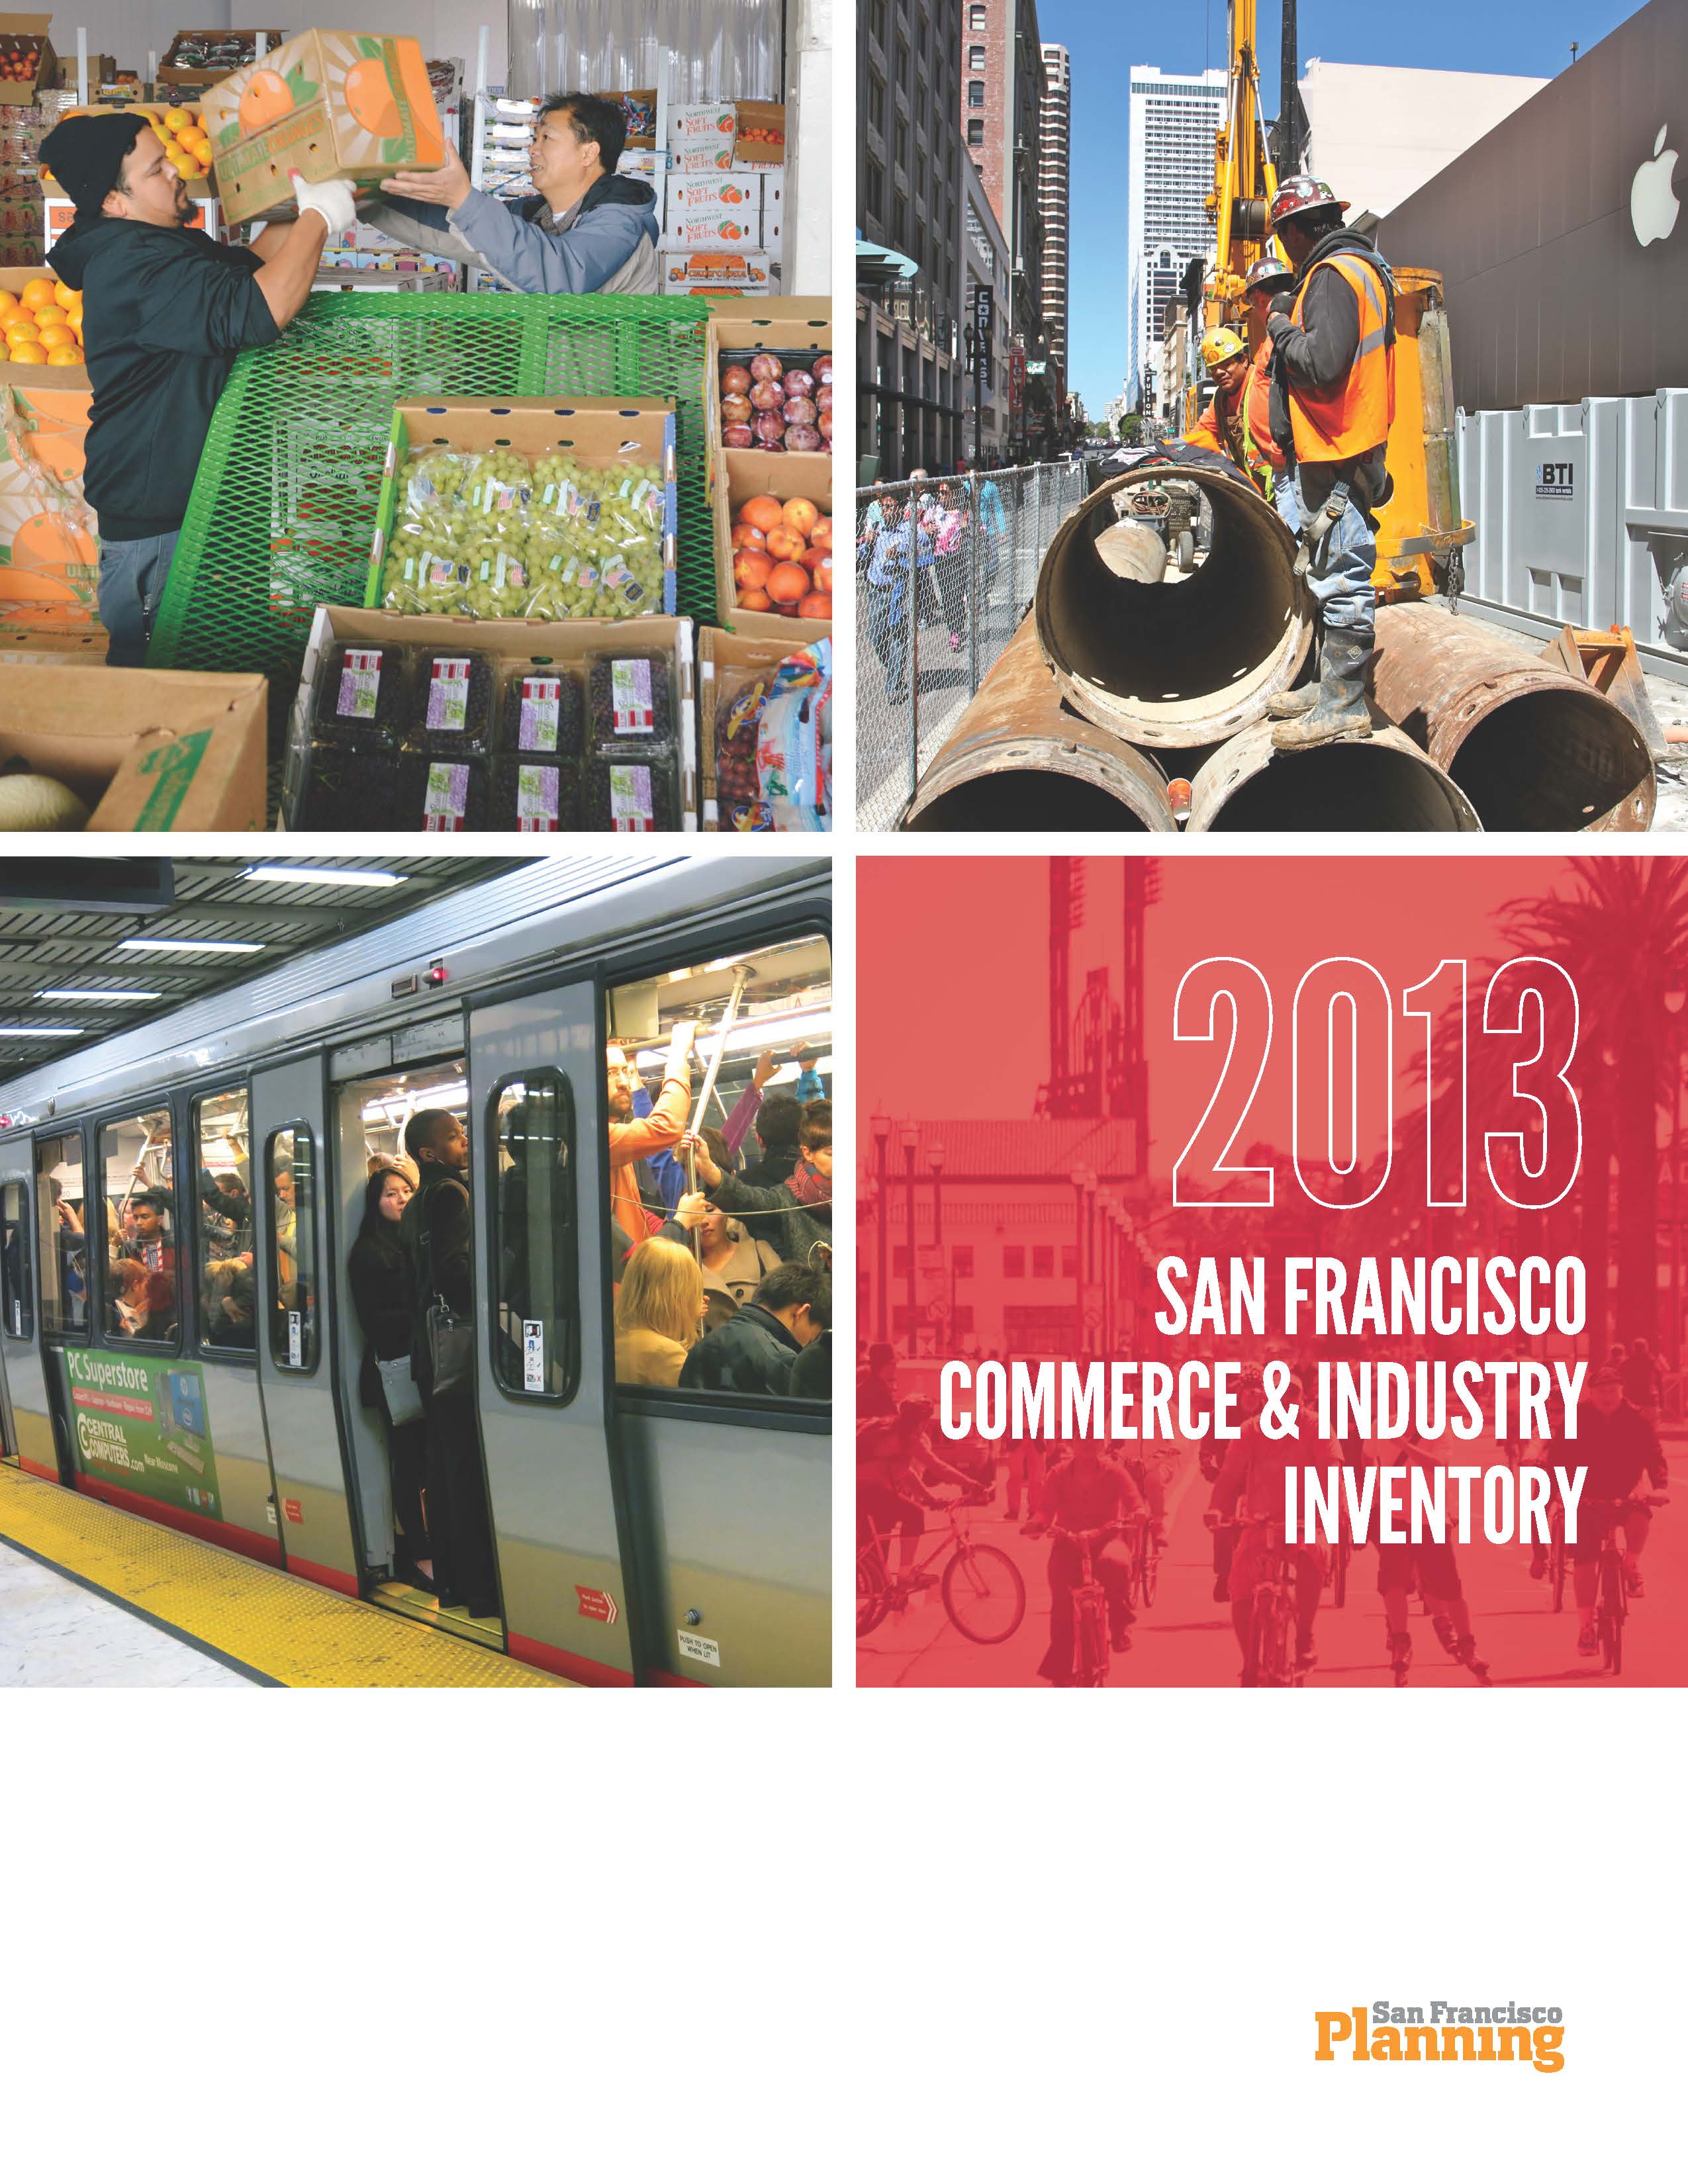 Cover Image for the 2013 Commerce & Industry Inventory Report